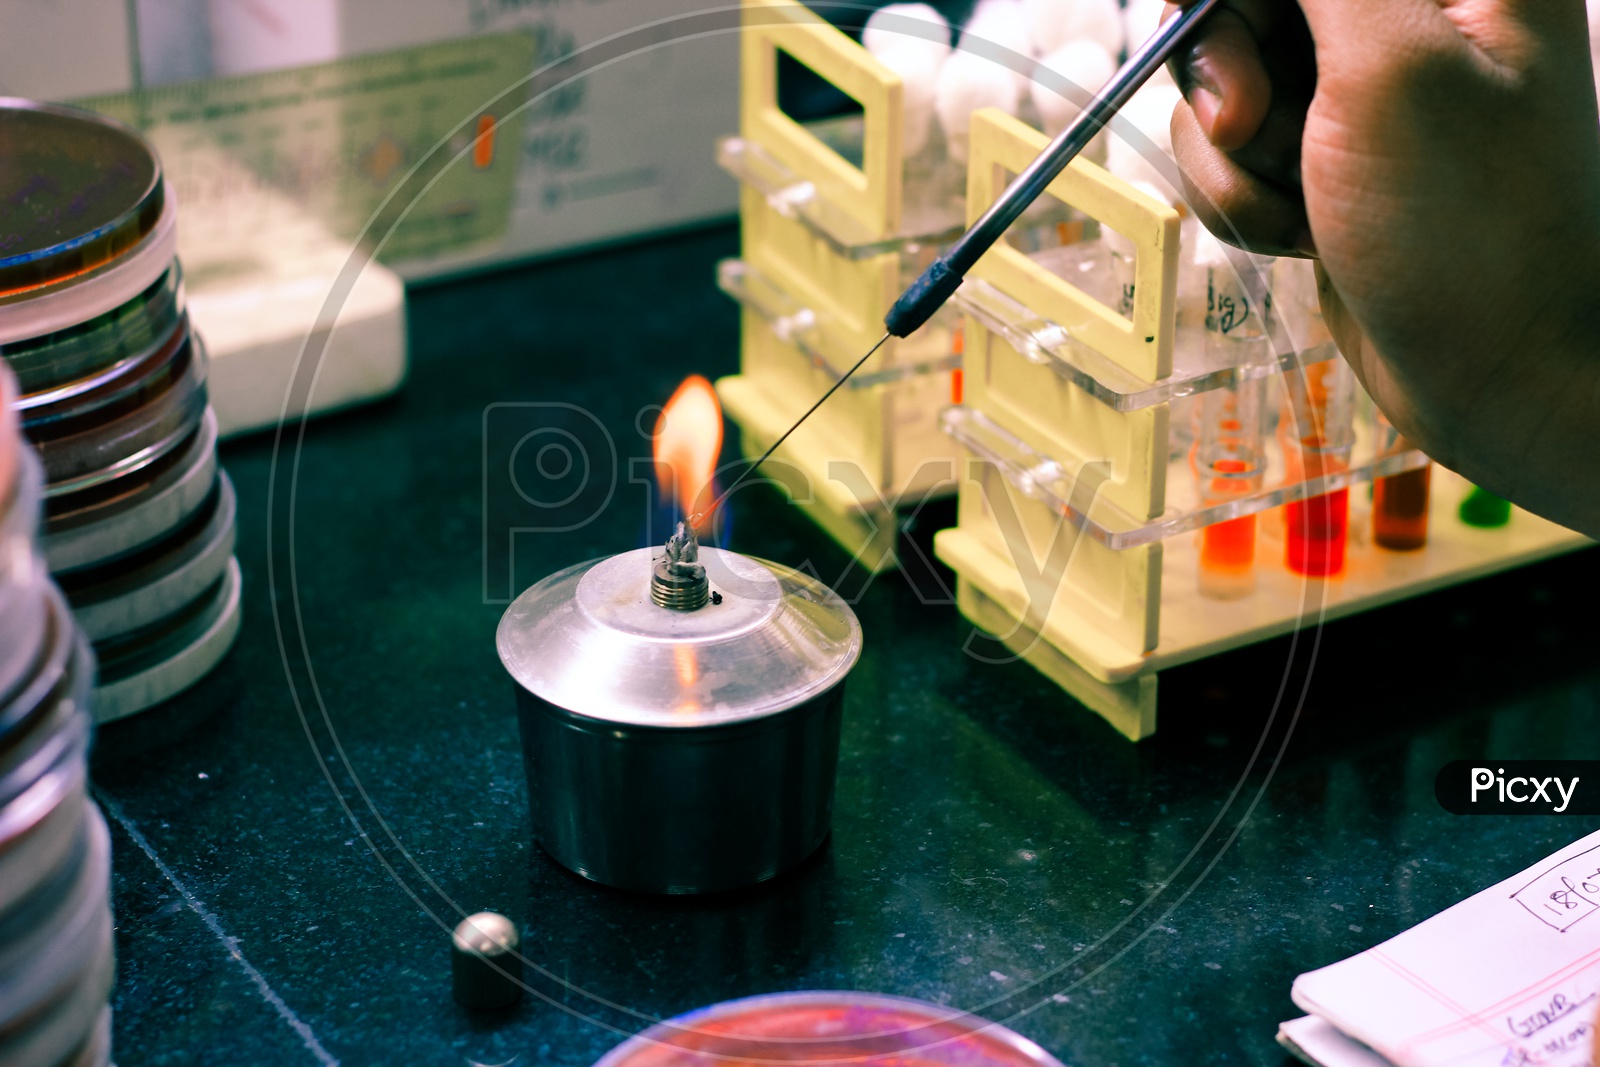 Microbiological Inoculation Loop Being Heated In A Spirit Lamp Flame For Sterilization Disinfection In A Microbiology Laboratory